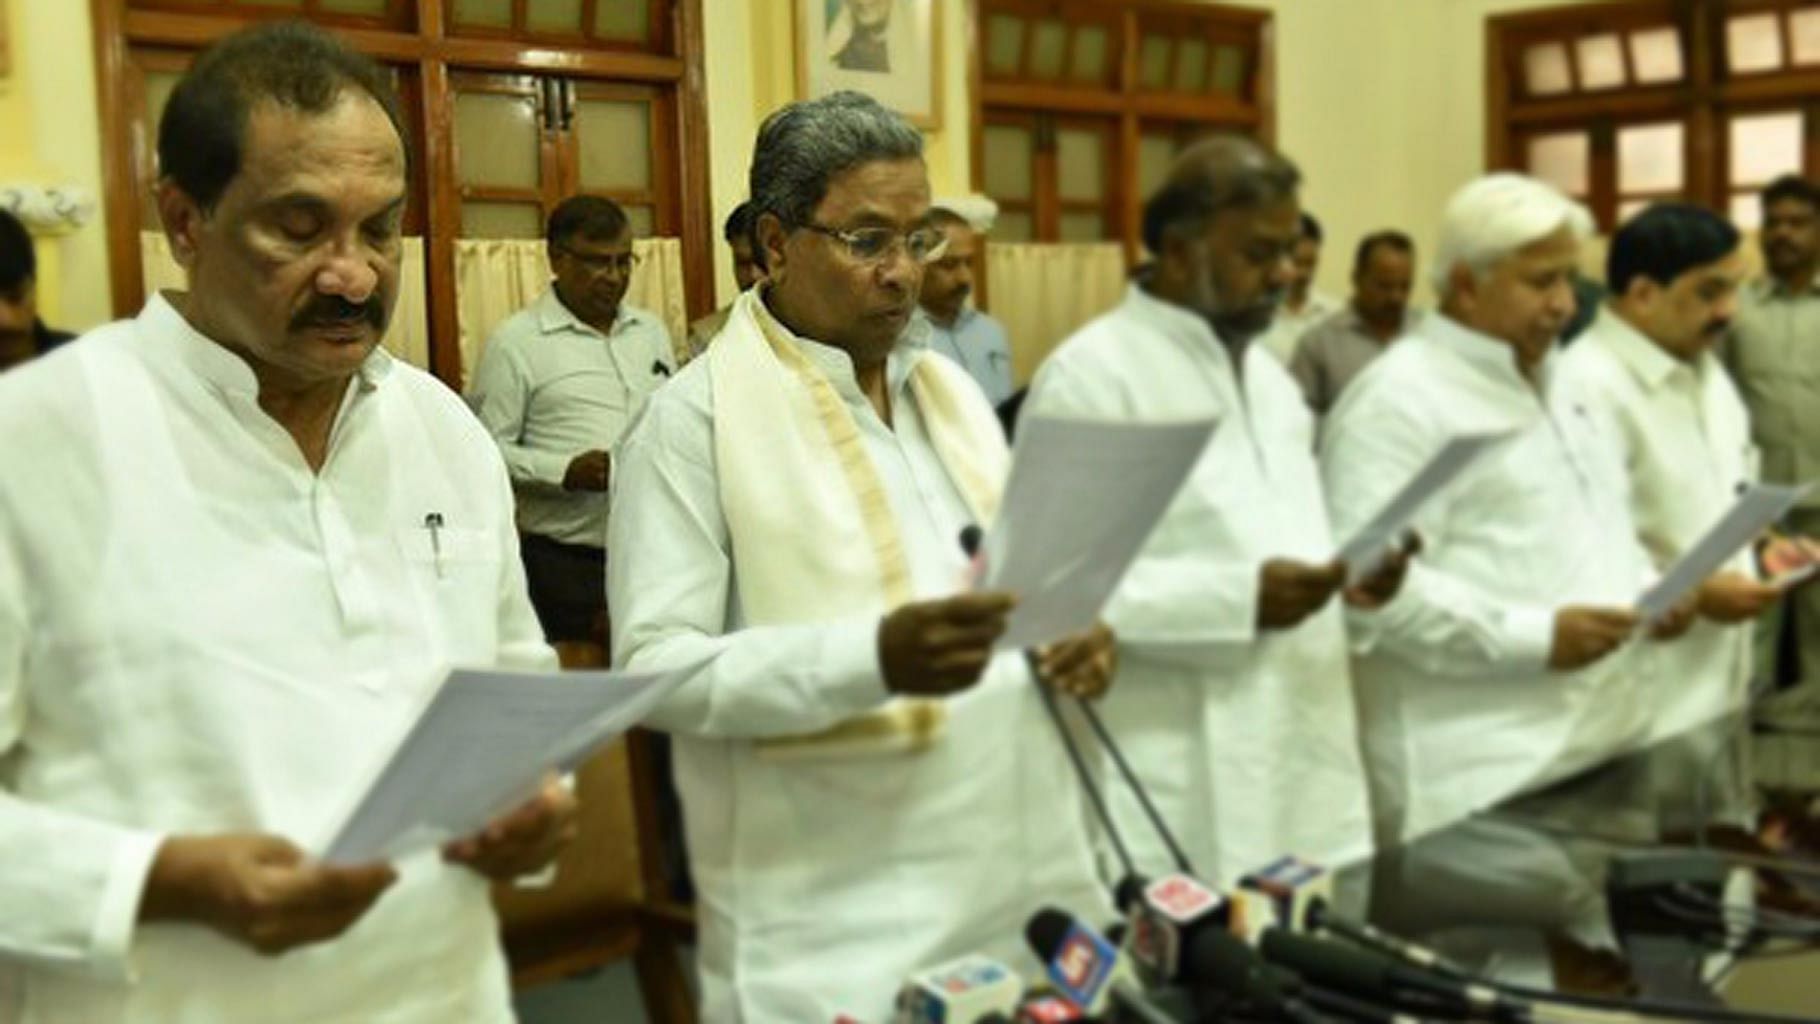 Pressure is mounting on Karnataka chief minister Siddaramiah. (Photo Courtesy: <a href="http://www.thenewsminute.com/article/dysp-ganapathys-death-continues-shake-assembly-now-demand-cbi-investigation-46497"><i>The News Minute</i></a>)